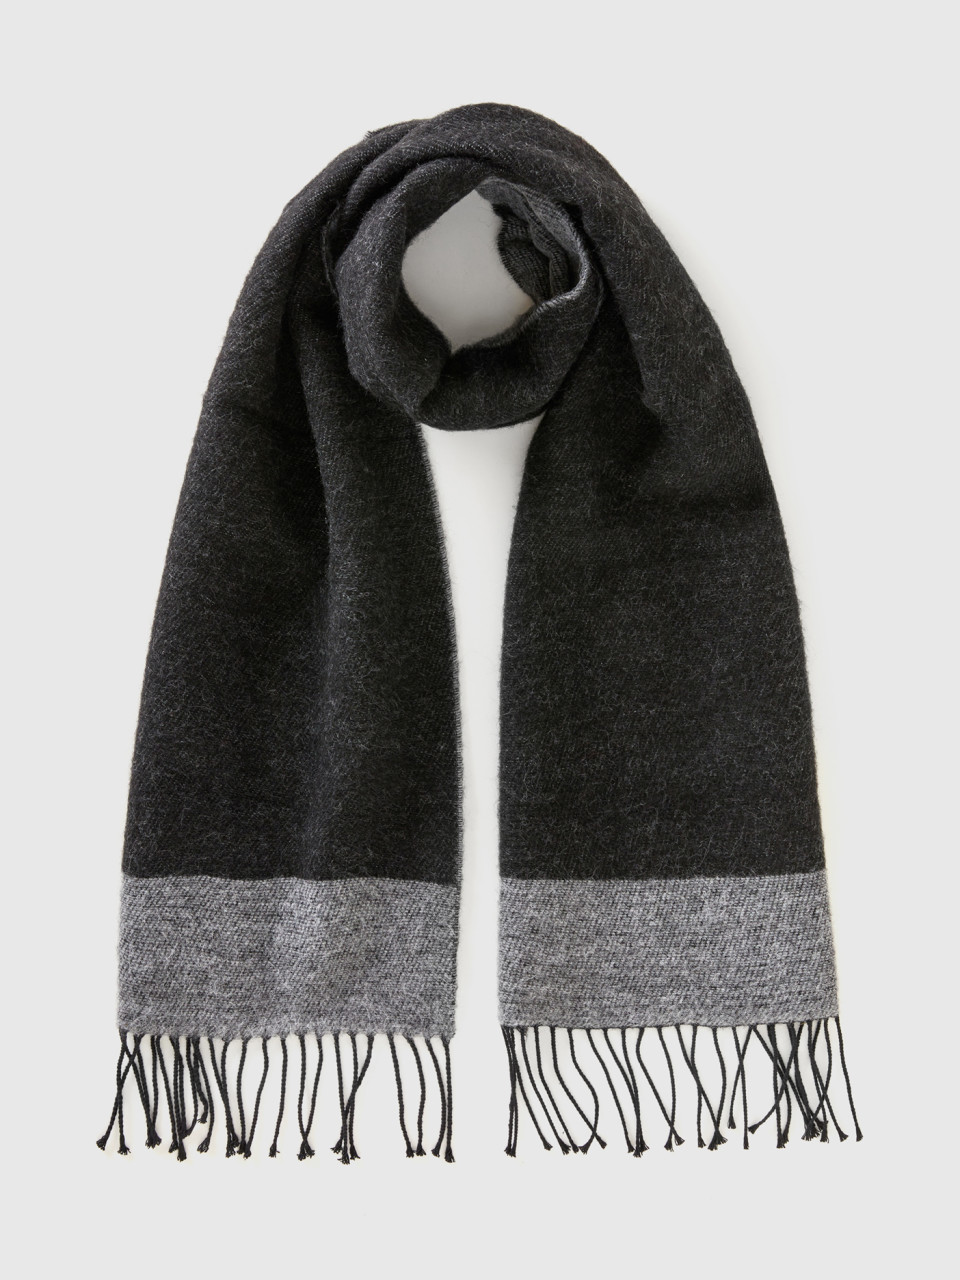 Benetton, Scarf In Recycled Cotton Blend, Black, Men